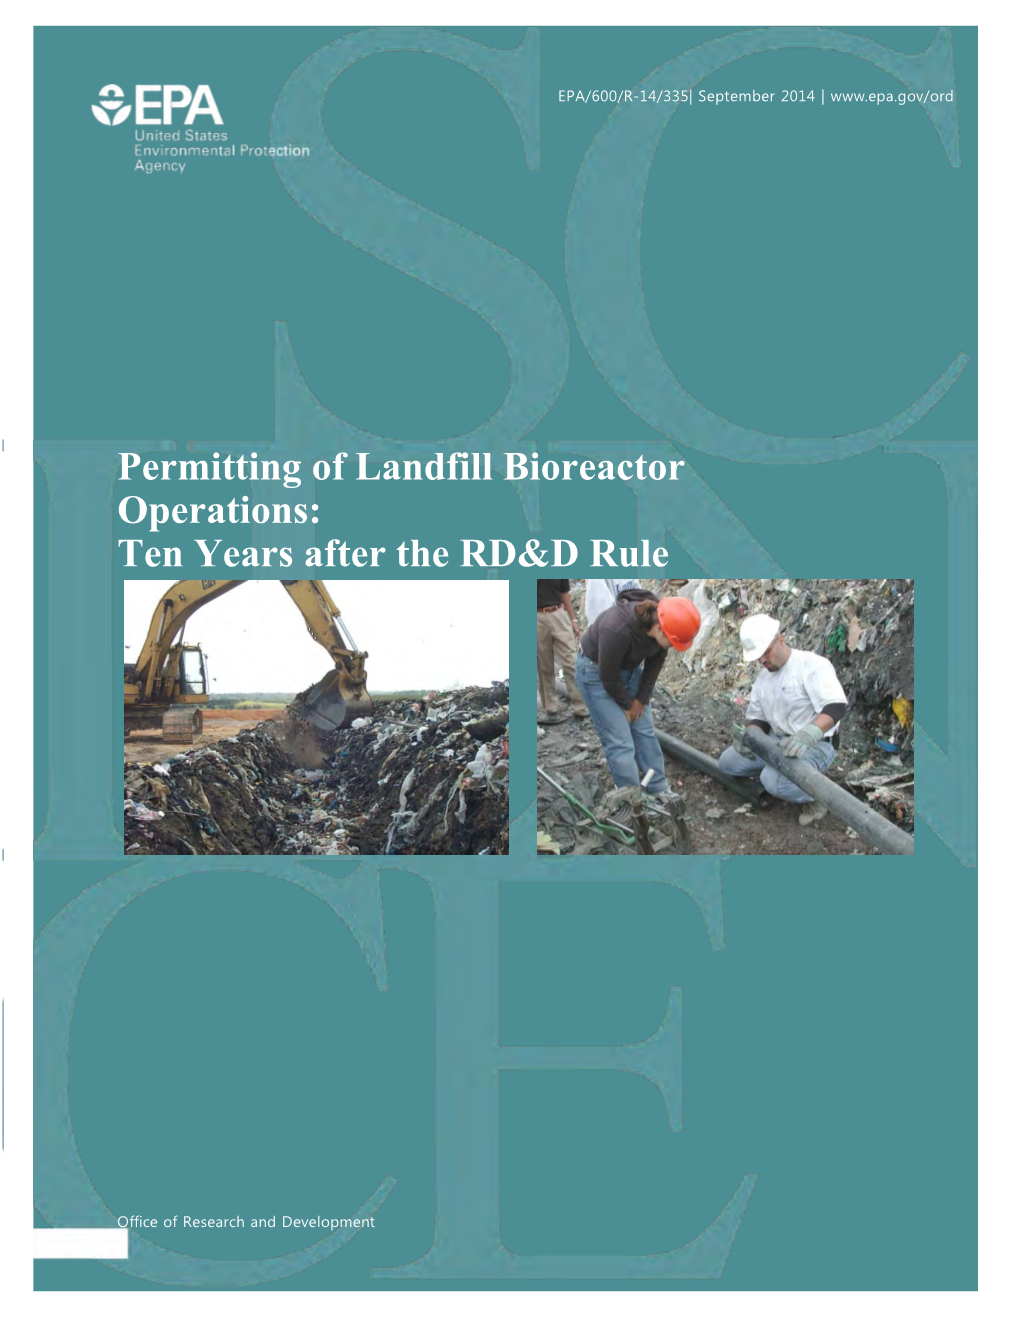 Permitting of Landfill Bioreactor Operations: Ten Years After the RD&D Rule